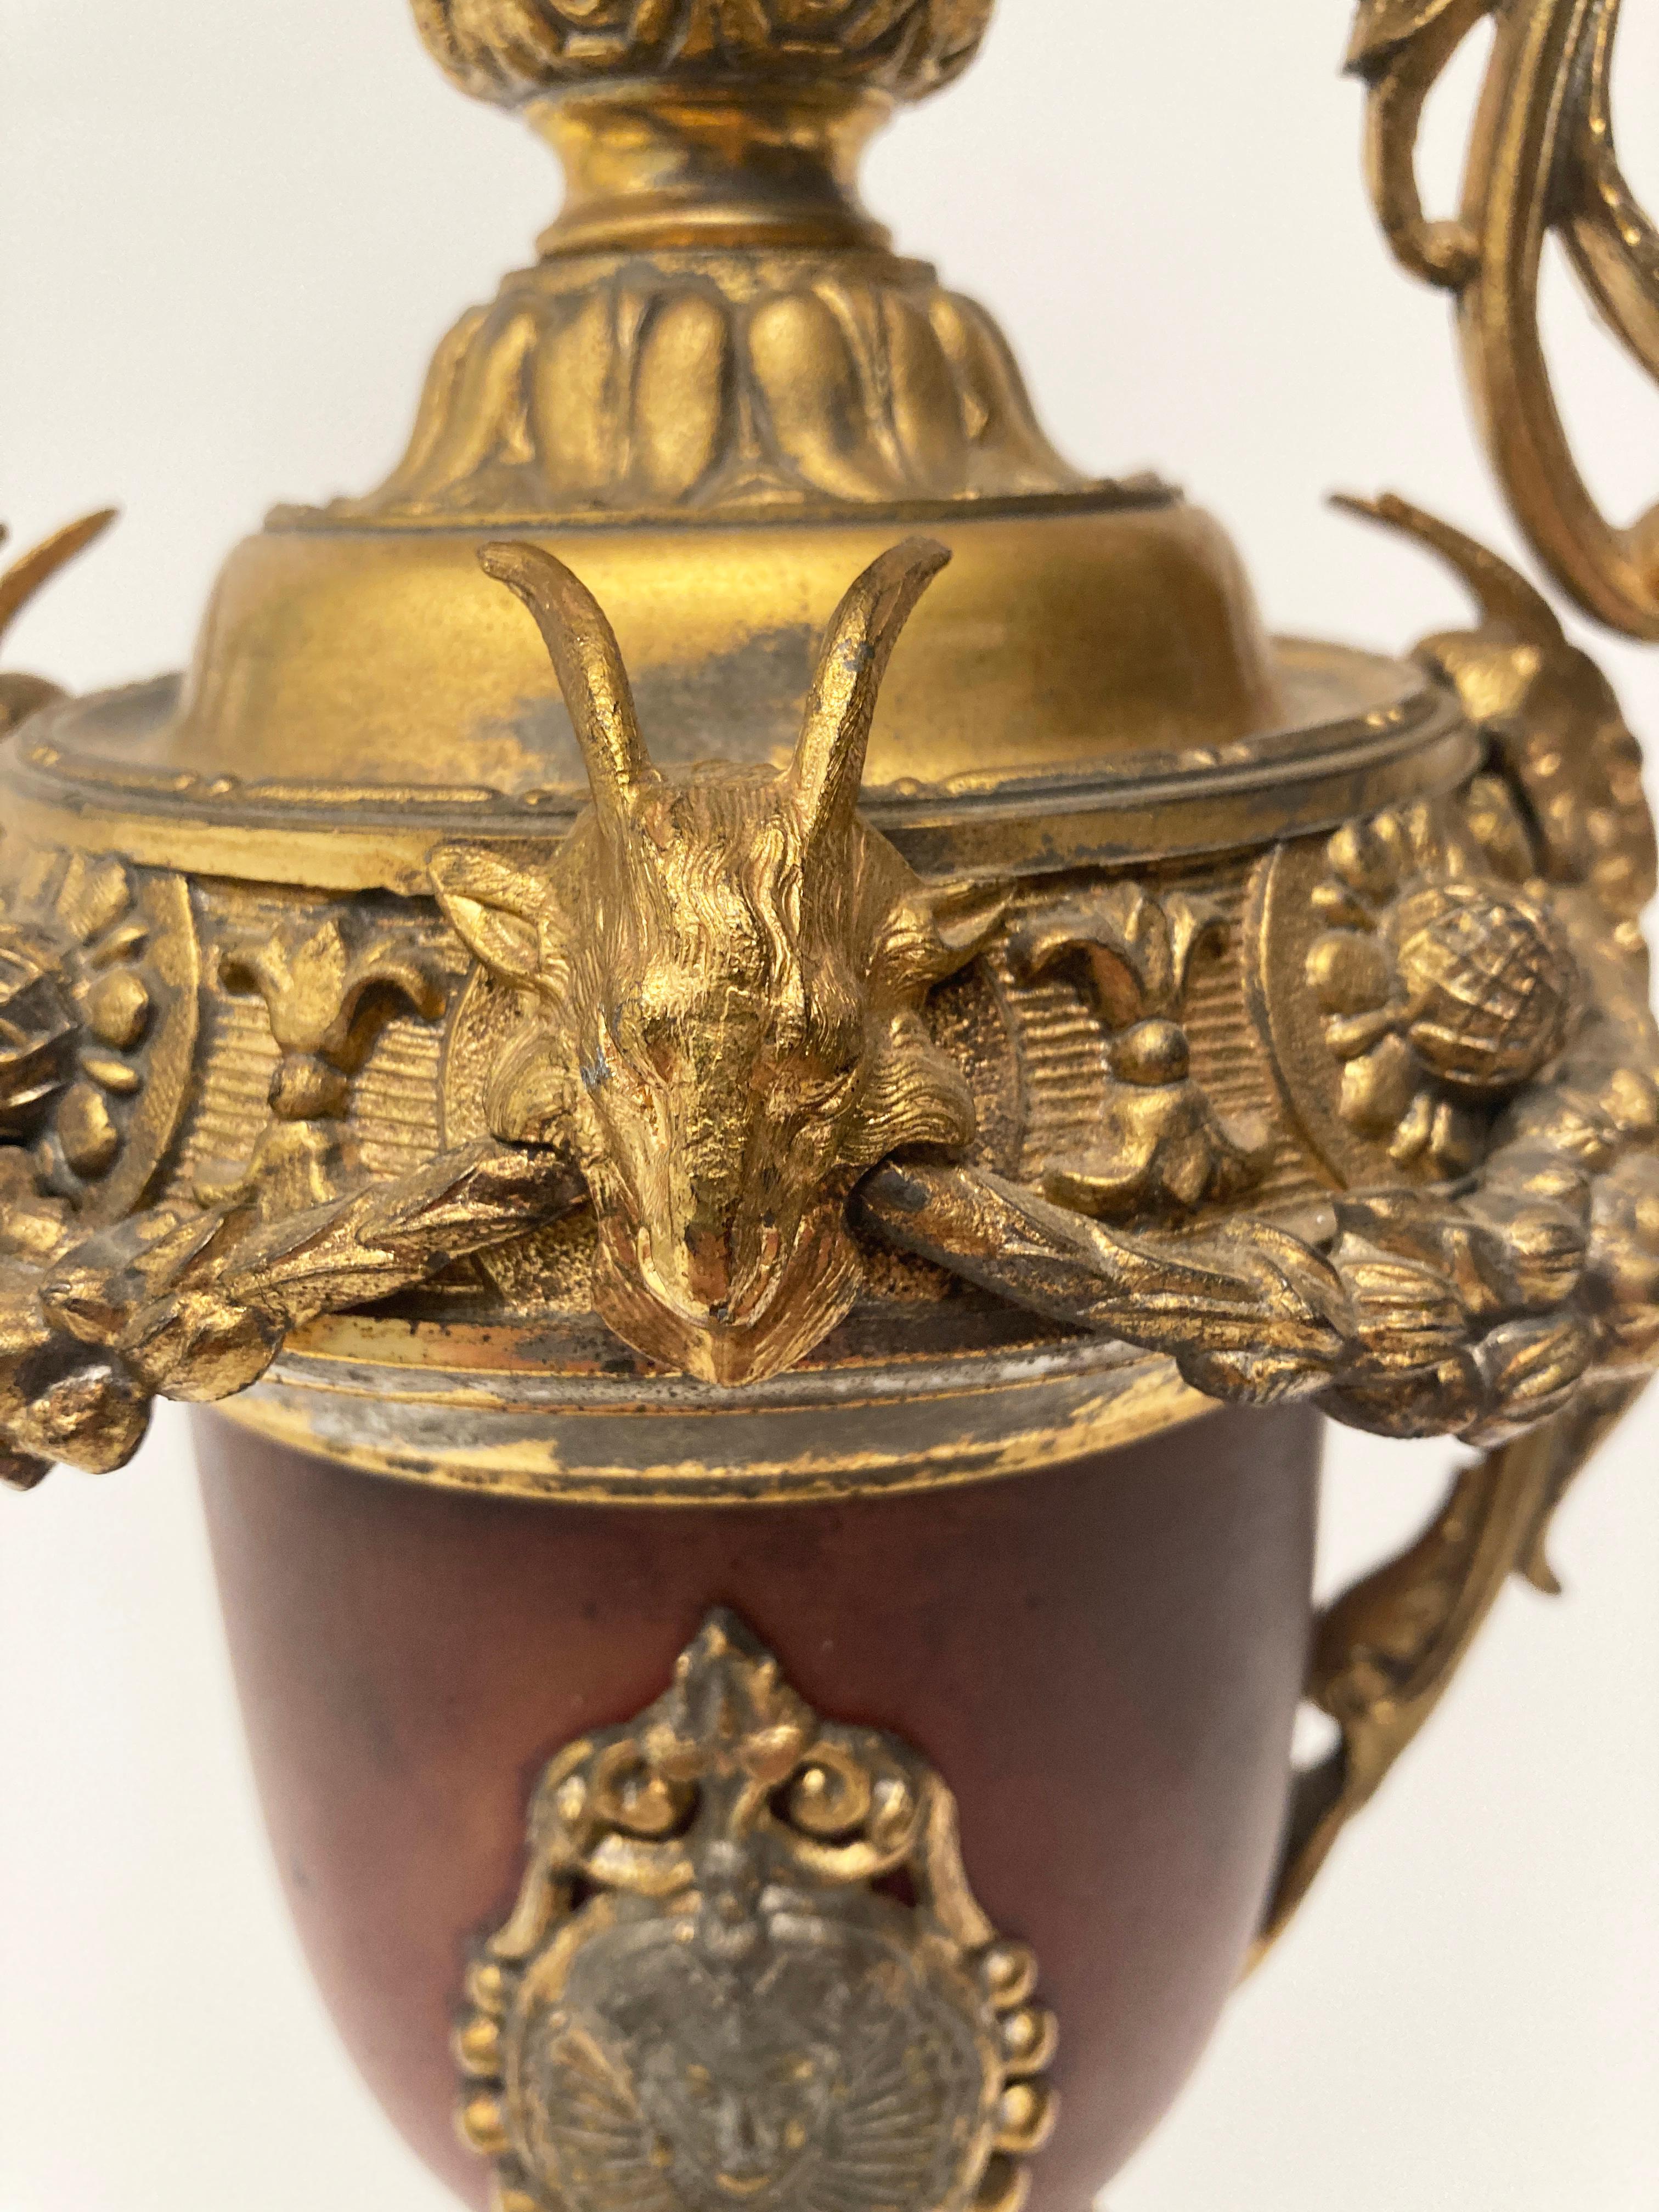 19th Century French Neo-Classic Spelter, Gilt, Bronze Cherub and Rams Head Ewer For Sale 6